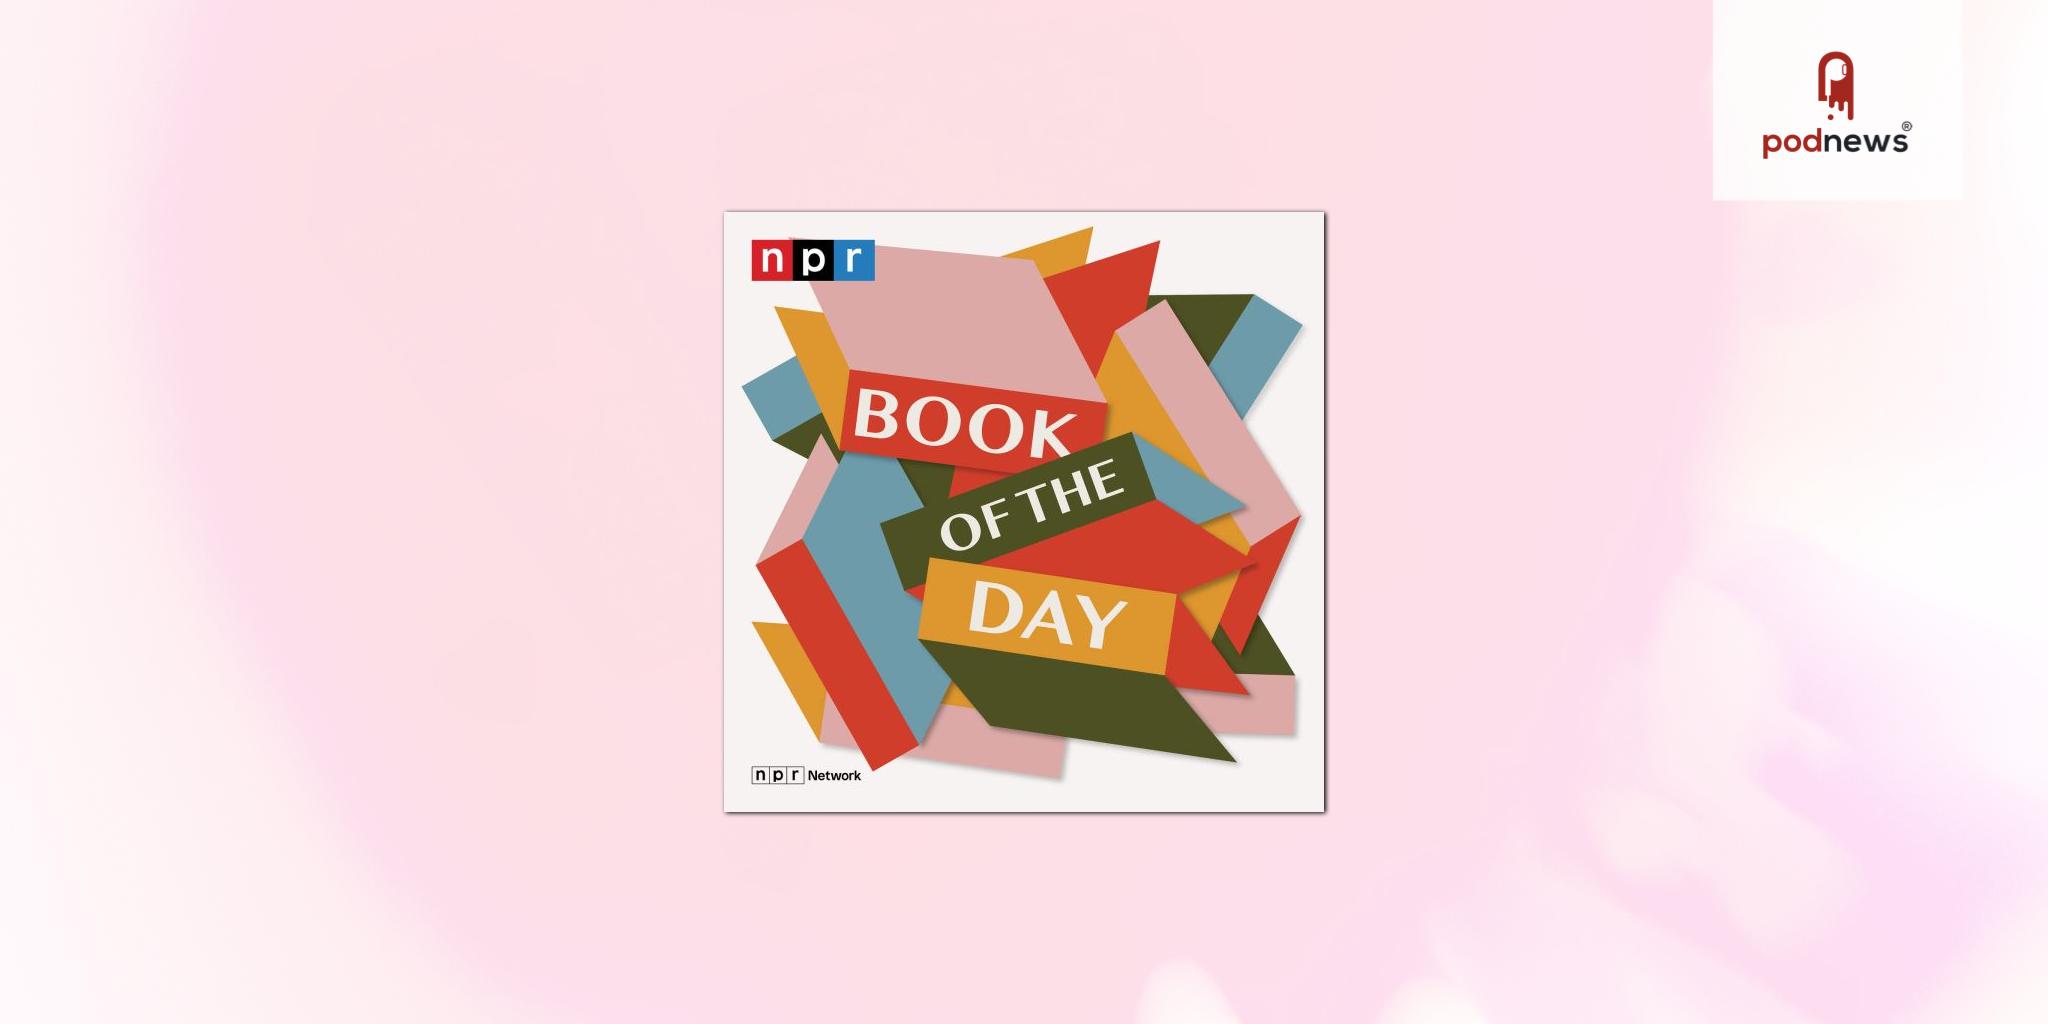 ‘NPR’s Book of the Day’ Podcast Debuts Today